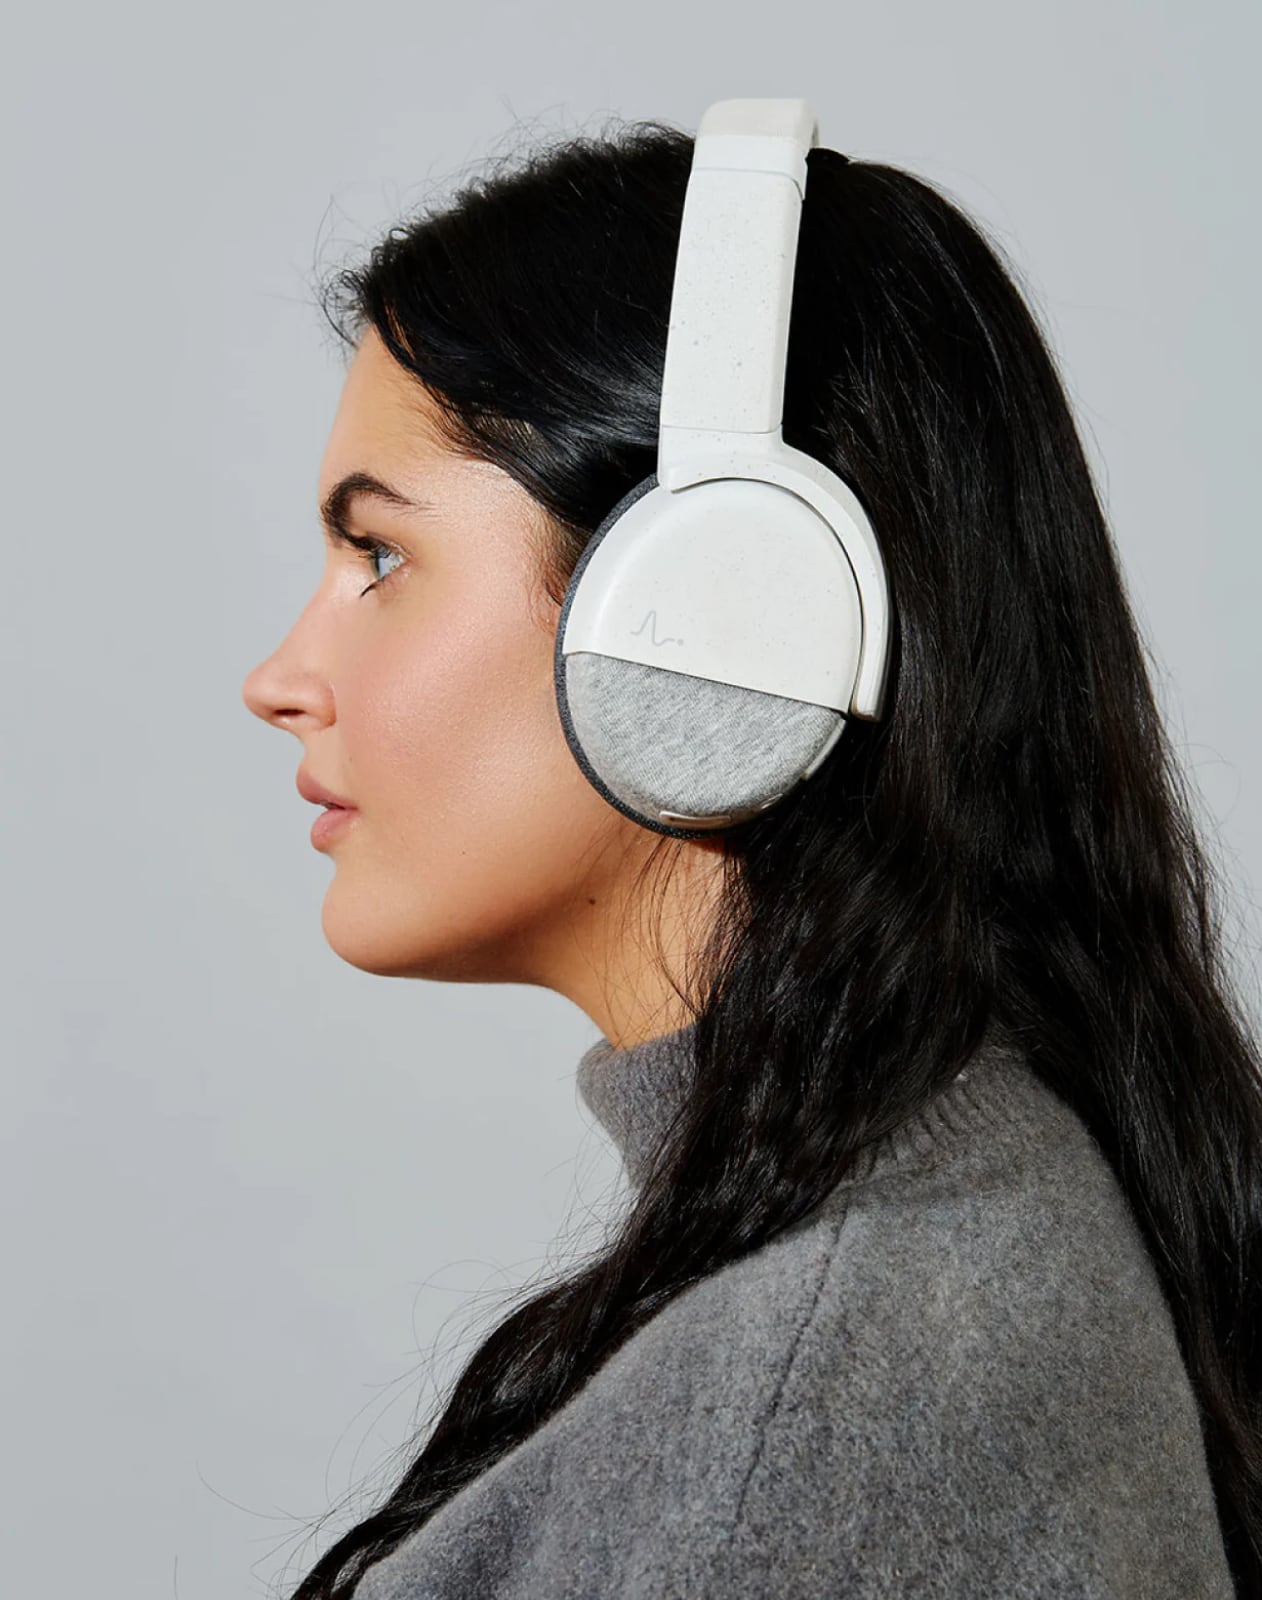 A side portrait photo of a young woman wearing Neurable’s Enten smart headphones in white colourway.